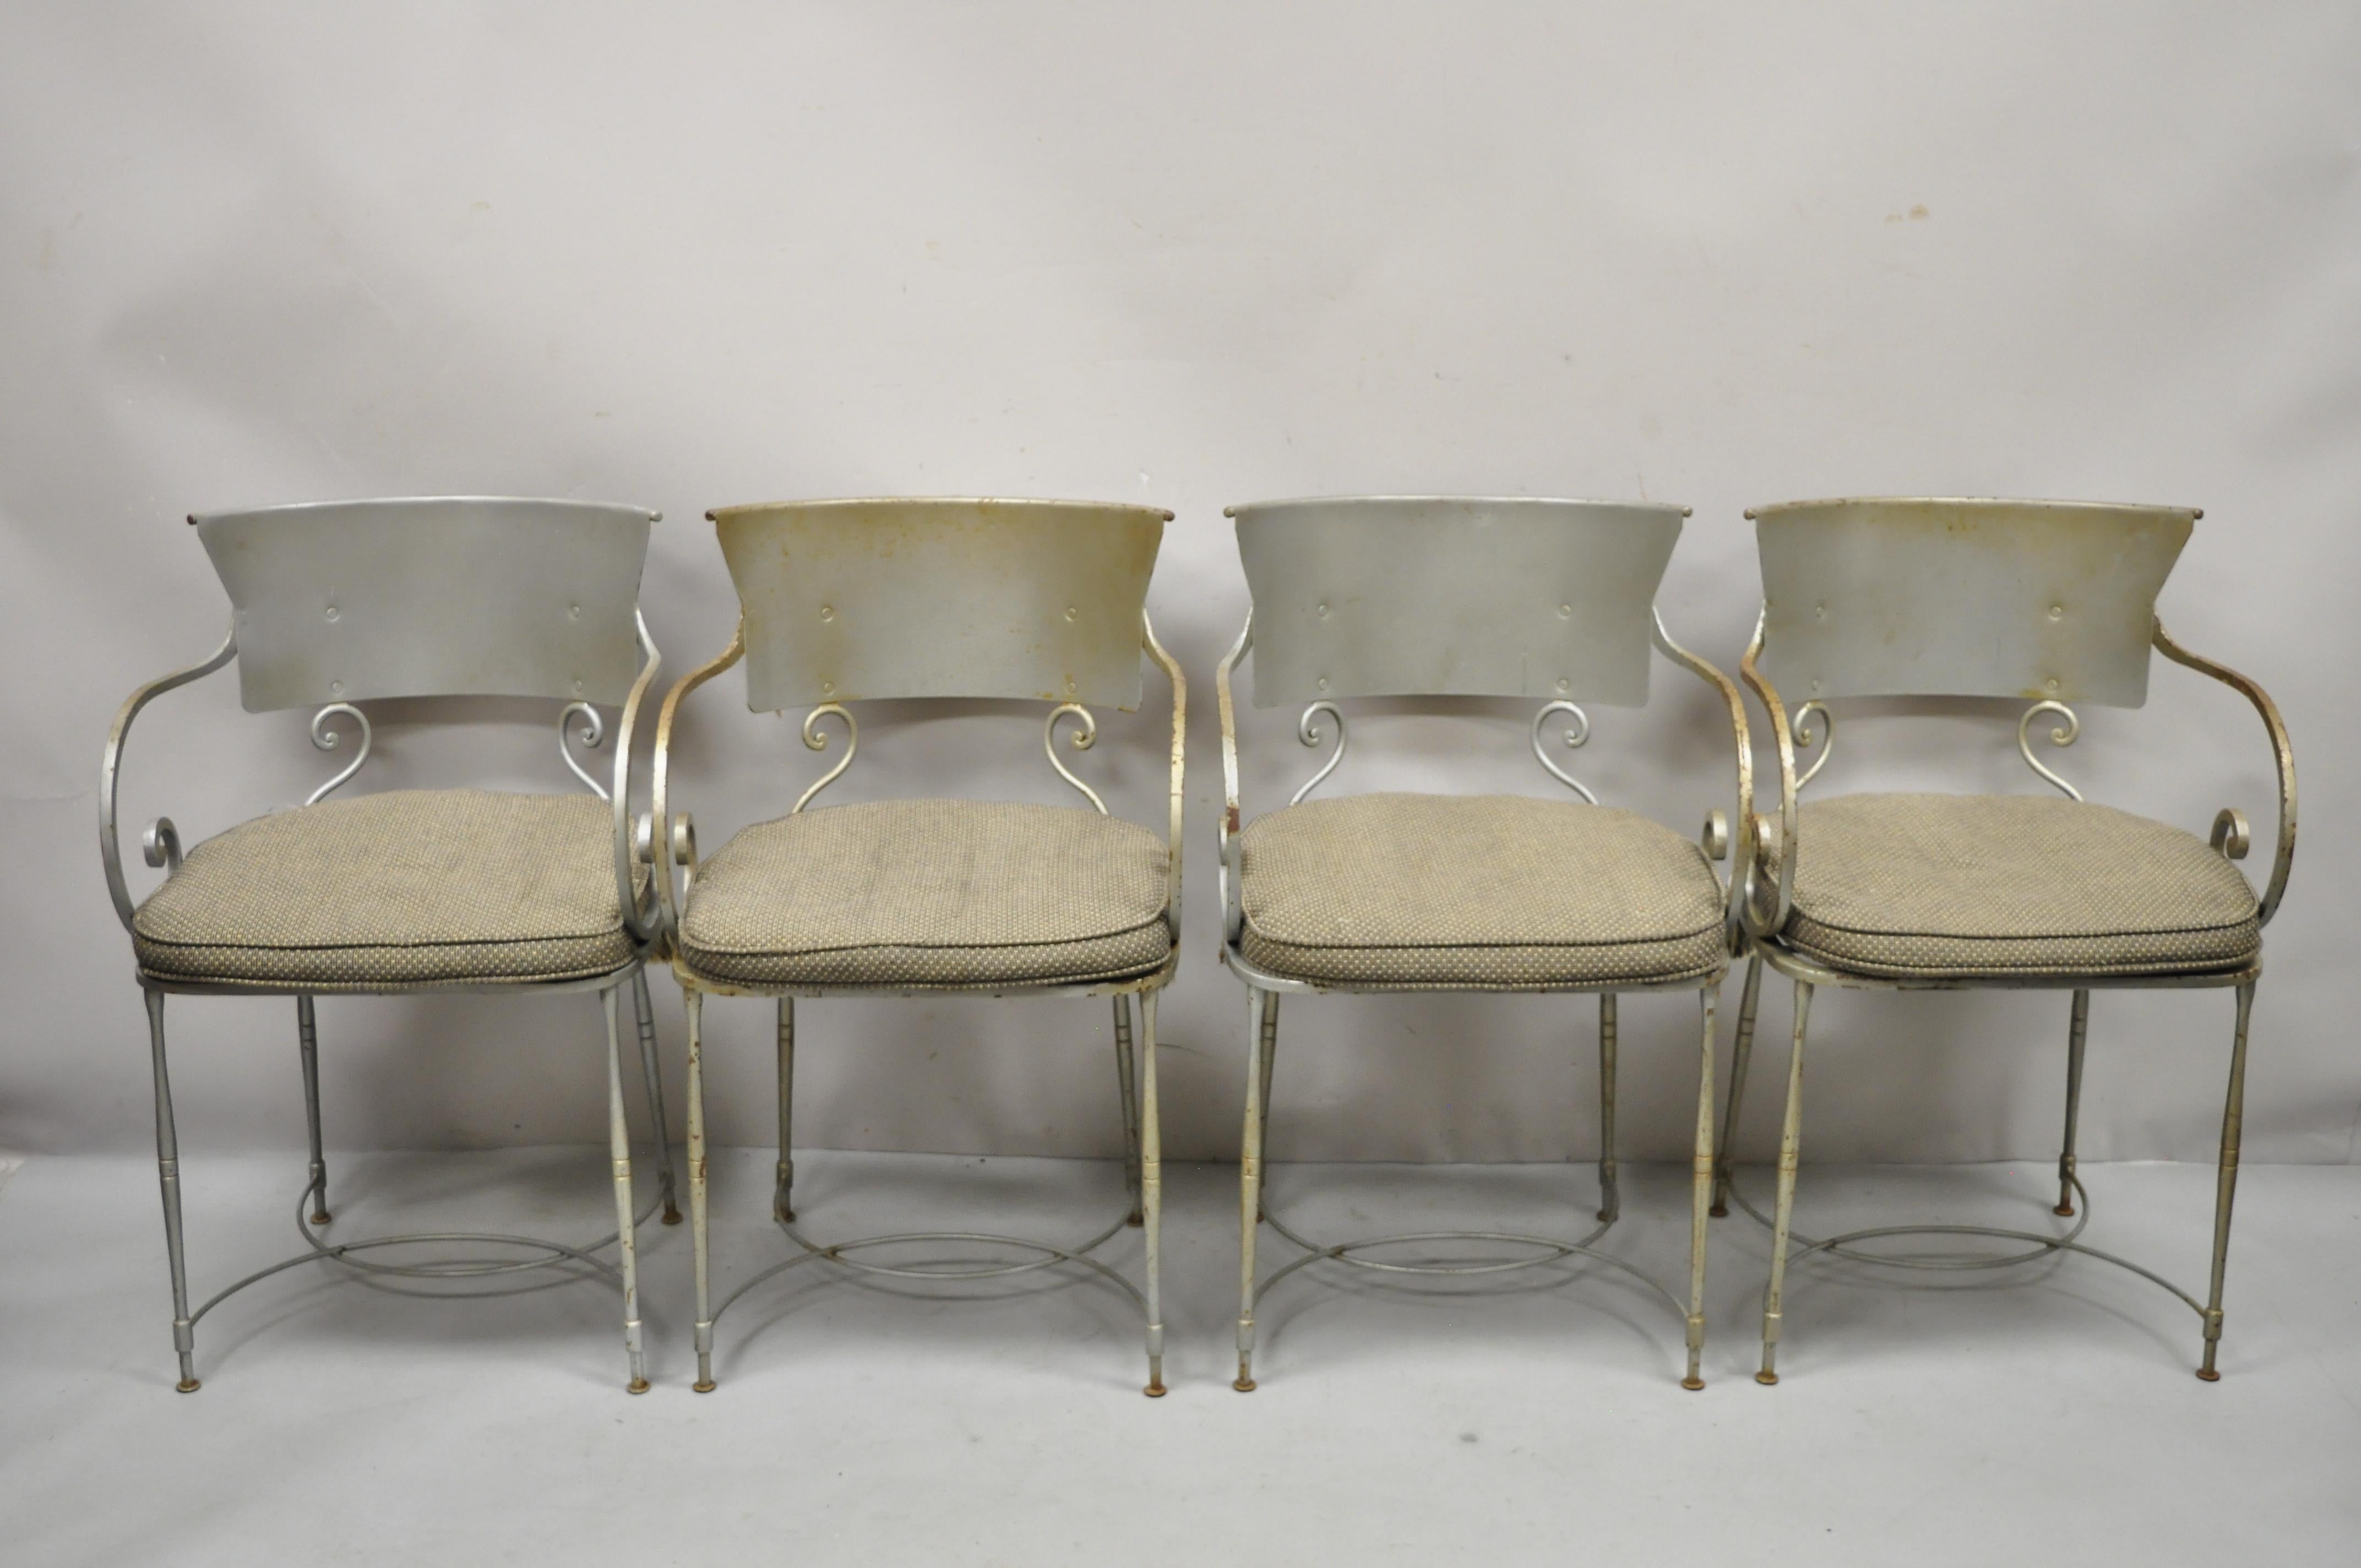 Vintage steel metal Hollywood Regency scrolling arm dining chairs - Set of 4. Set includes (4) armchairs, loose cushions, heavy steel metal frame, curved backs, stretcher base, scrolling arms, very nice vintage item, quality craftsmanship, great